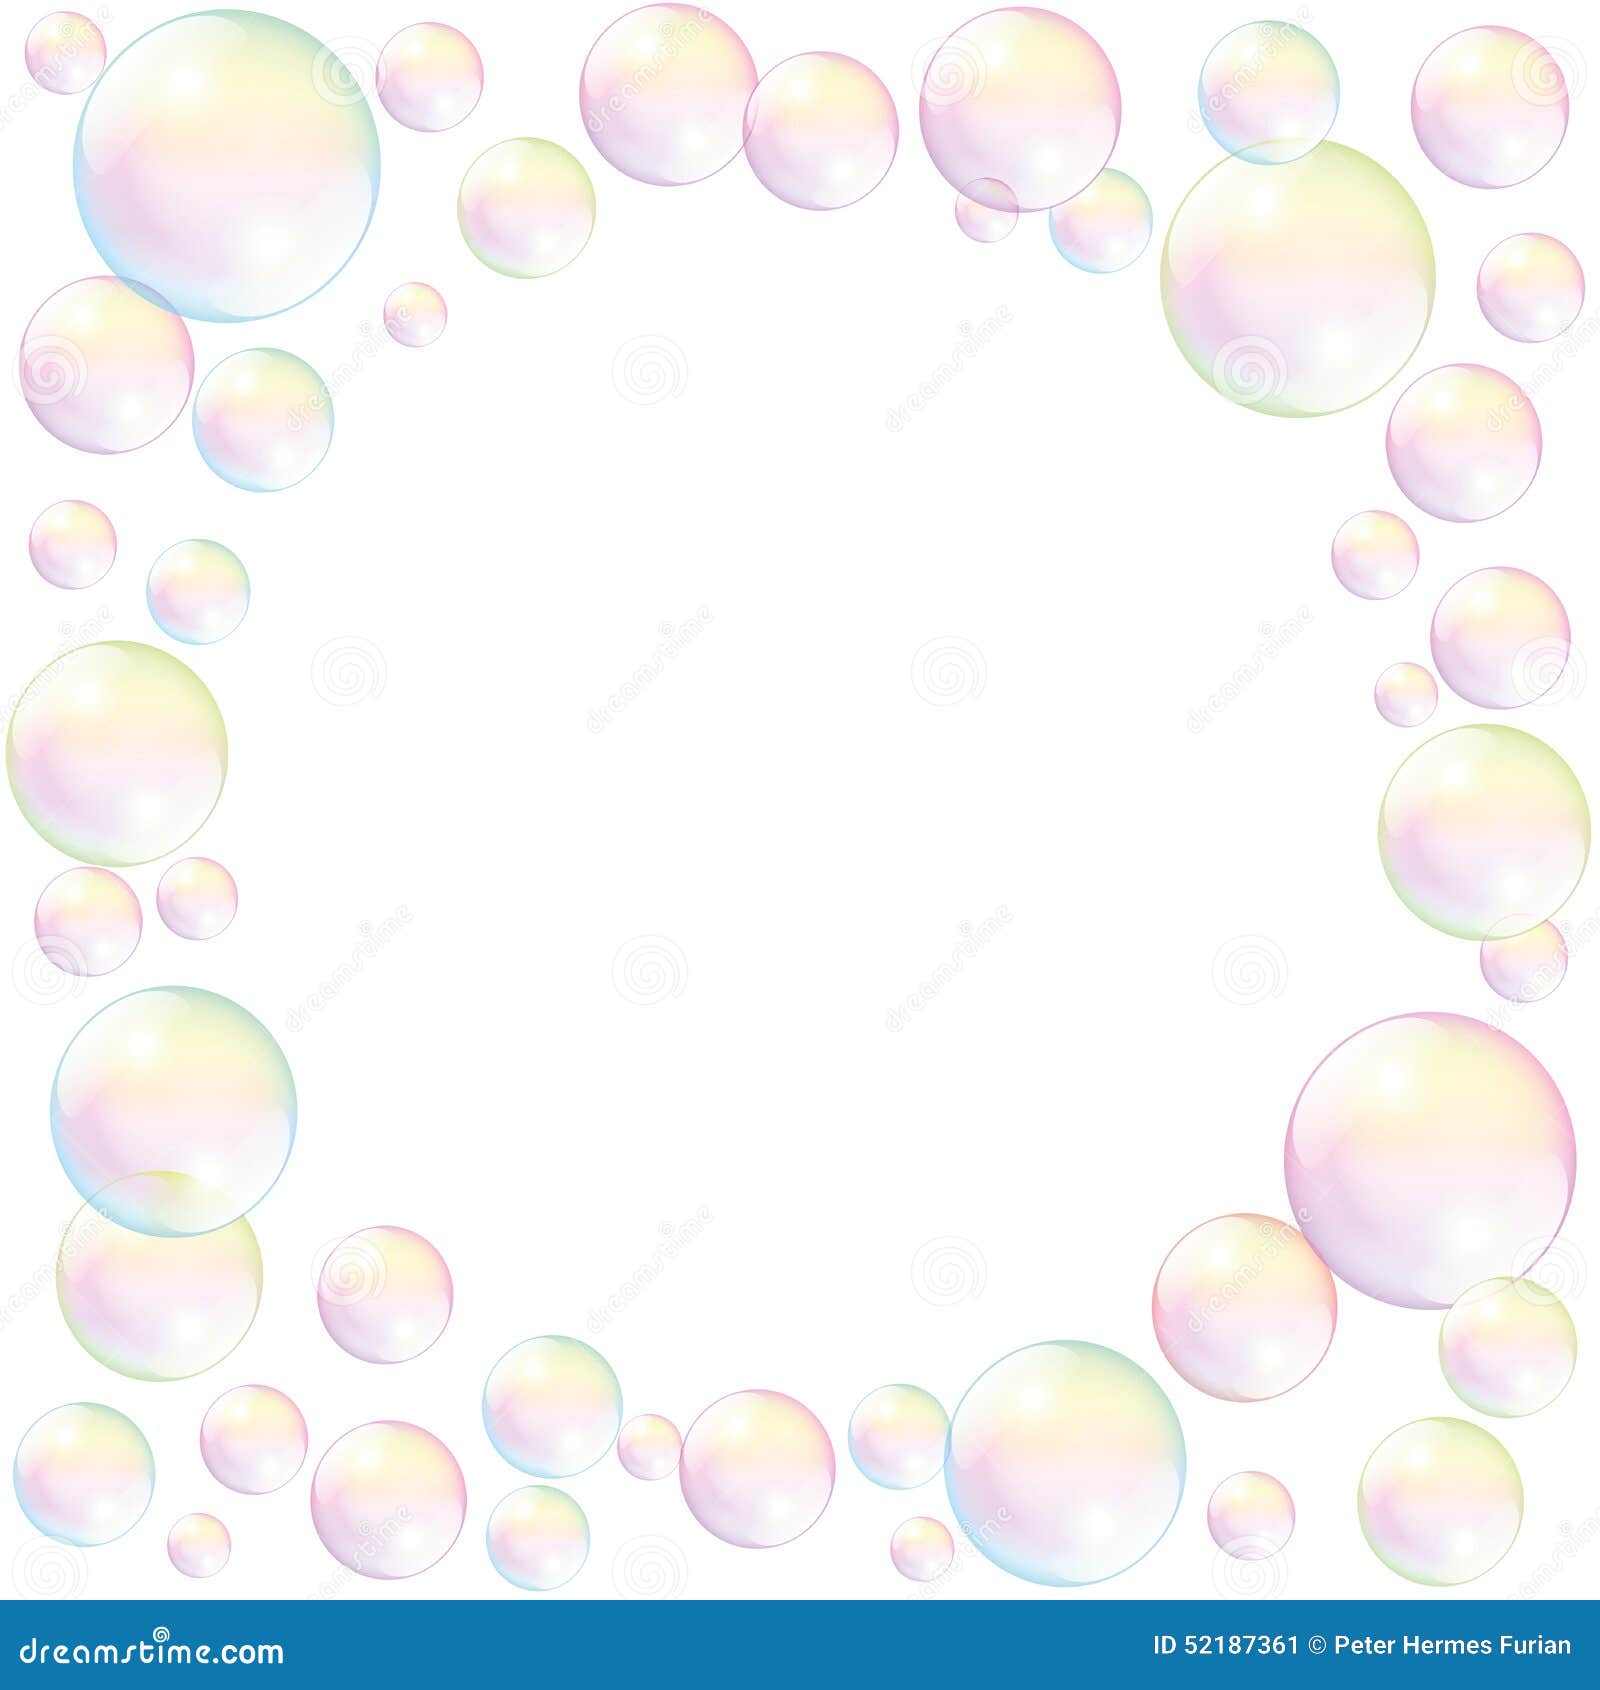 transparent soap bubble background border isolated on white vector